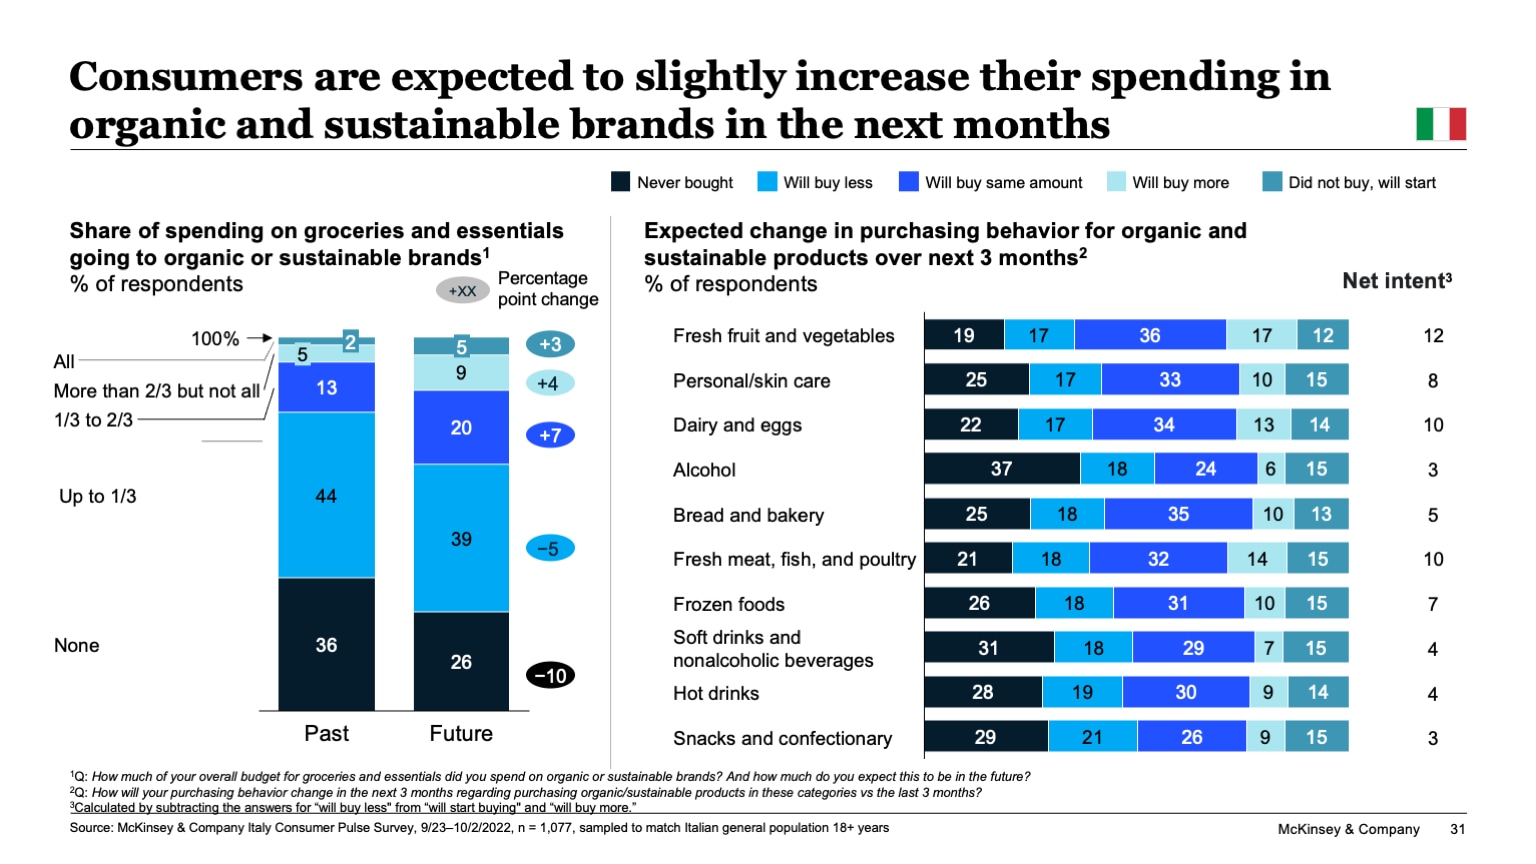 Consumers are expected to slightly increase their spending in organic and sustainable brands in the next months